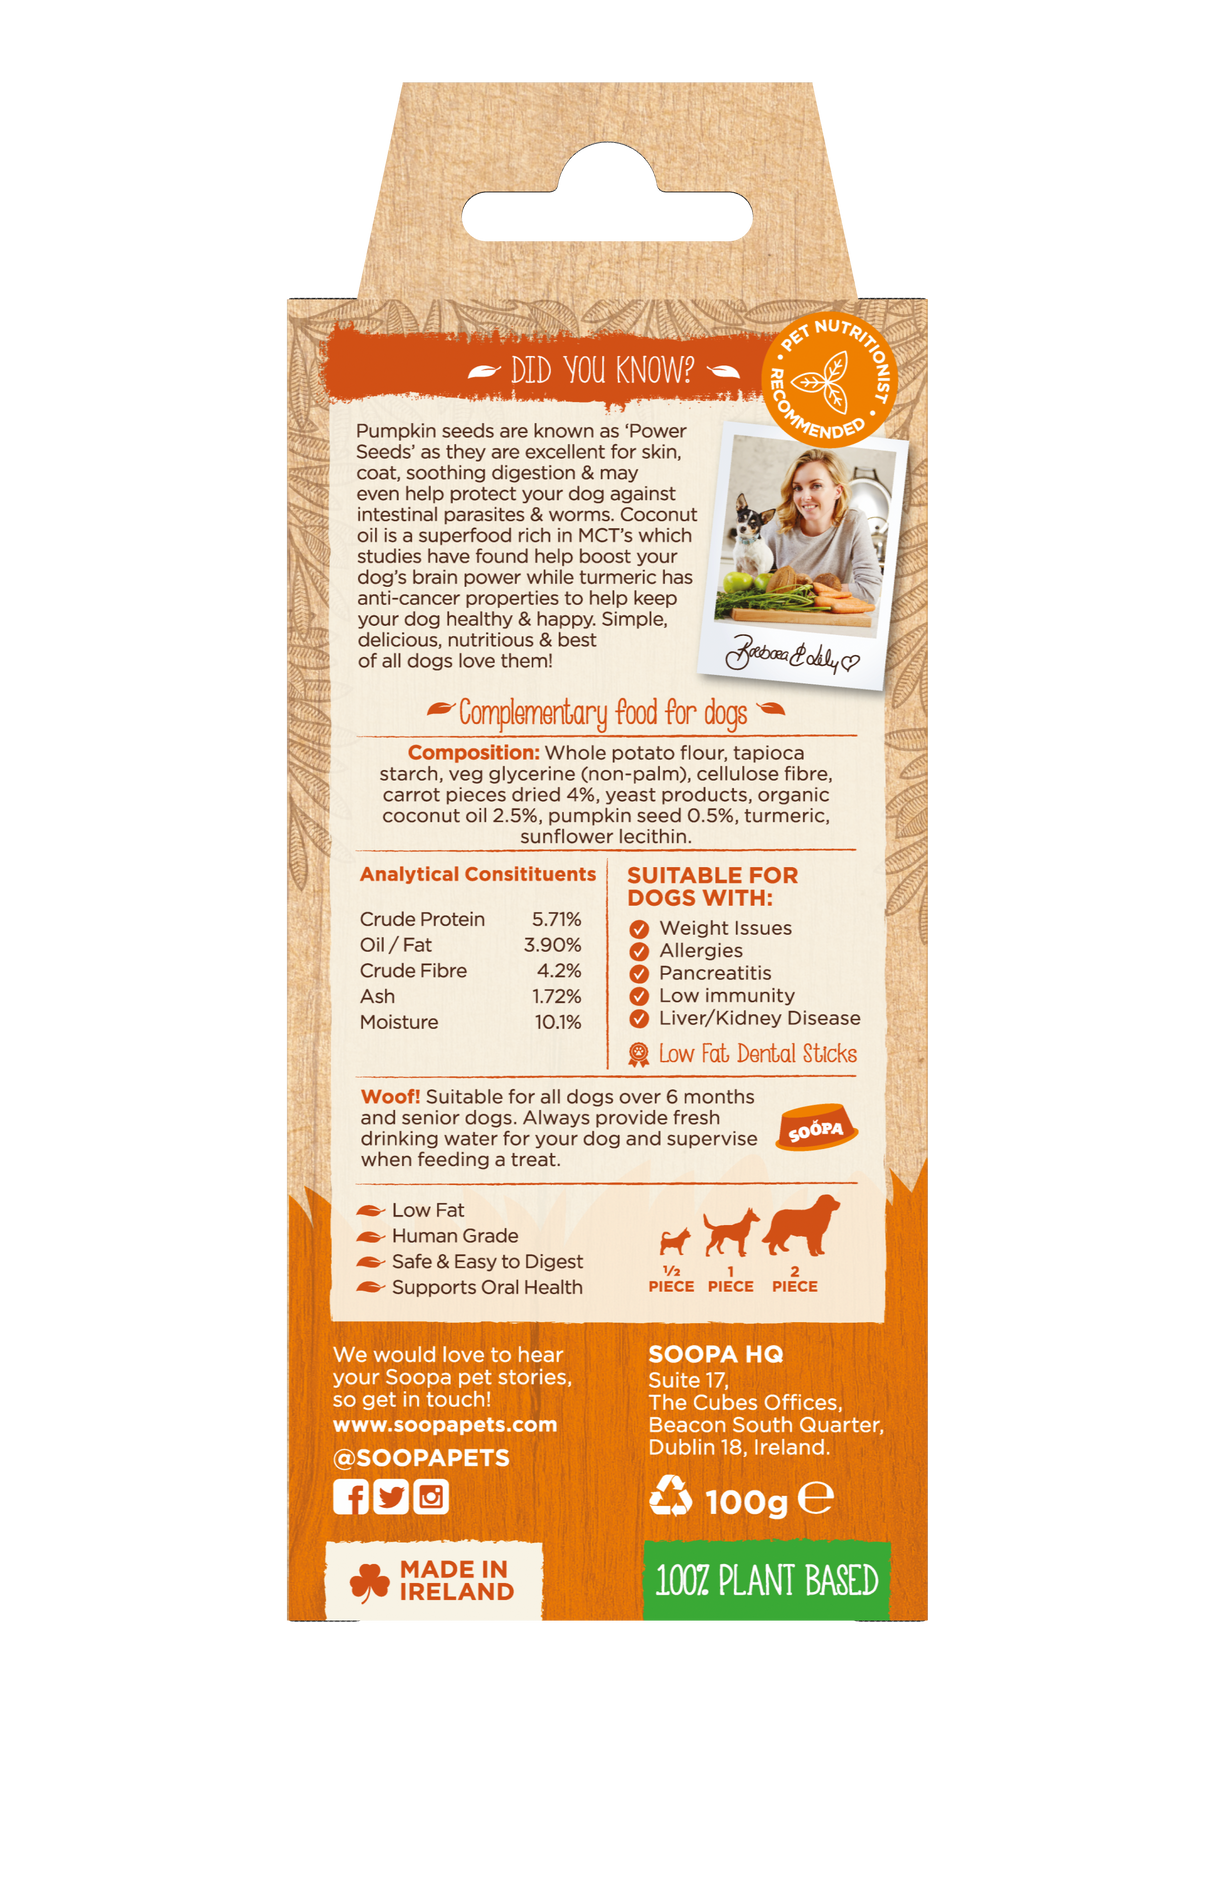 Soopa Single Pack Carrot and Pumpkin Dental Sticks for Dogs 100g